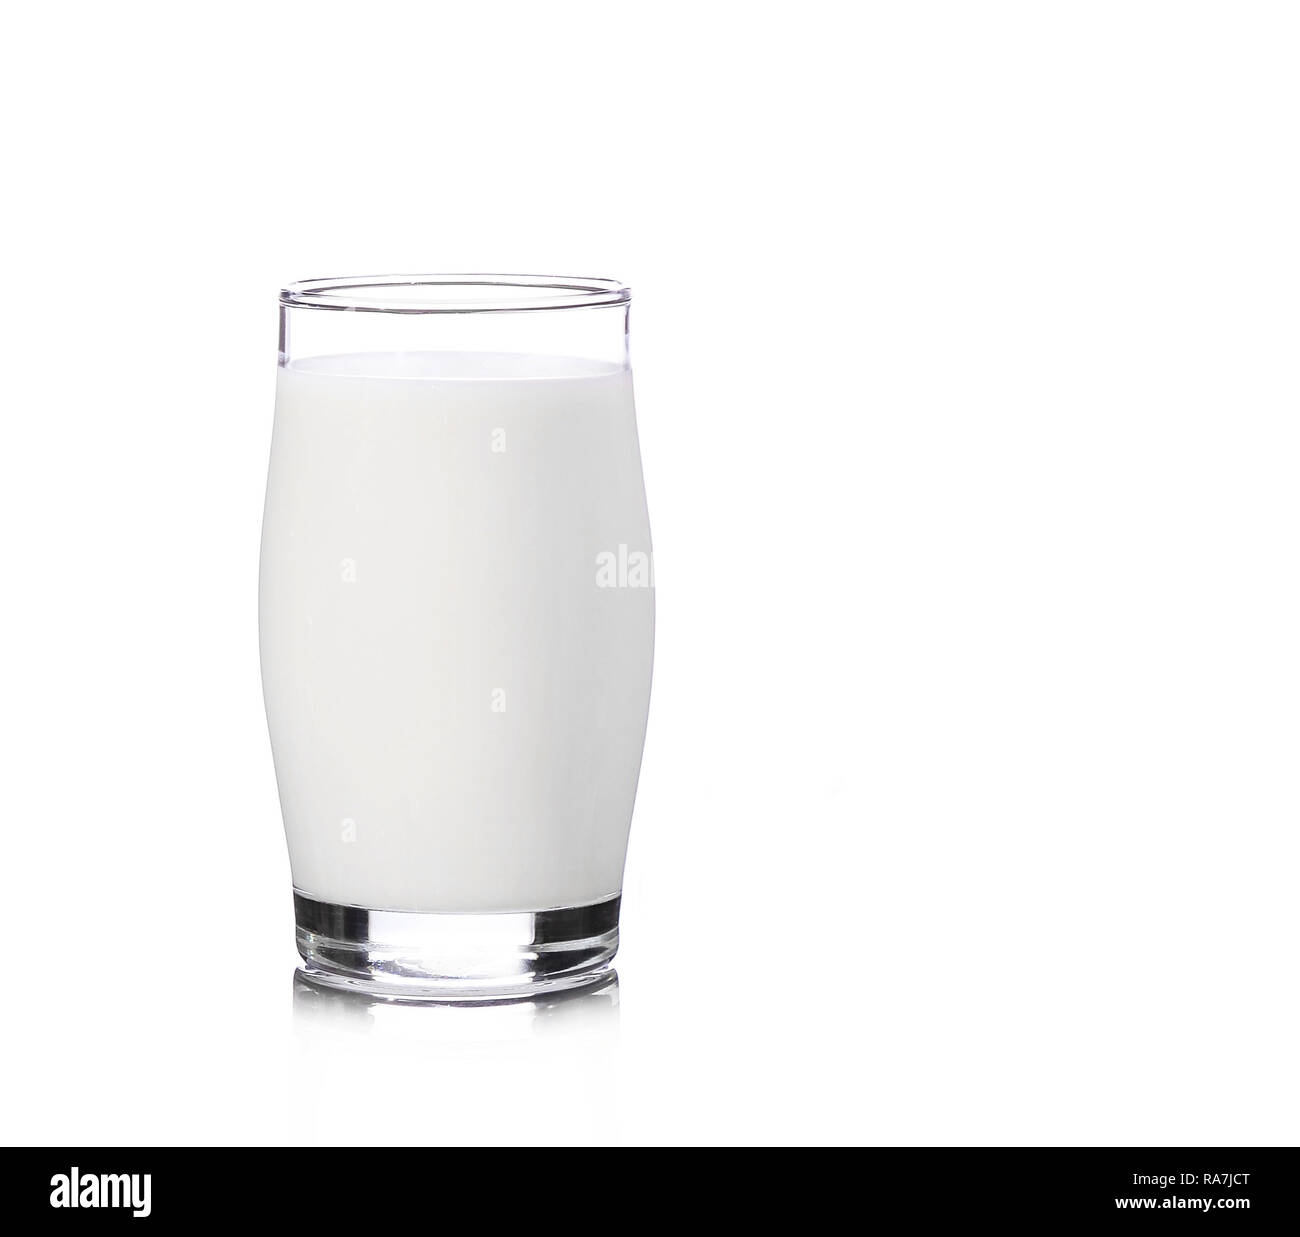 https://c8.alamy.com/comp/RA7JCT/pill-and-glass-of-milk-isolated-on-white-background-RA7JCT.jpg